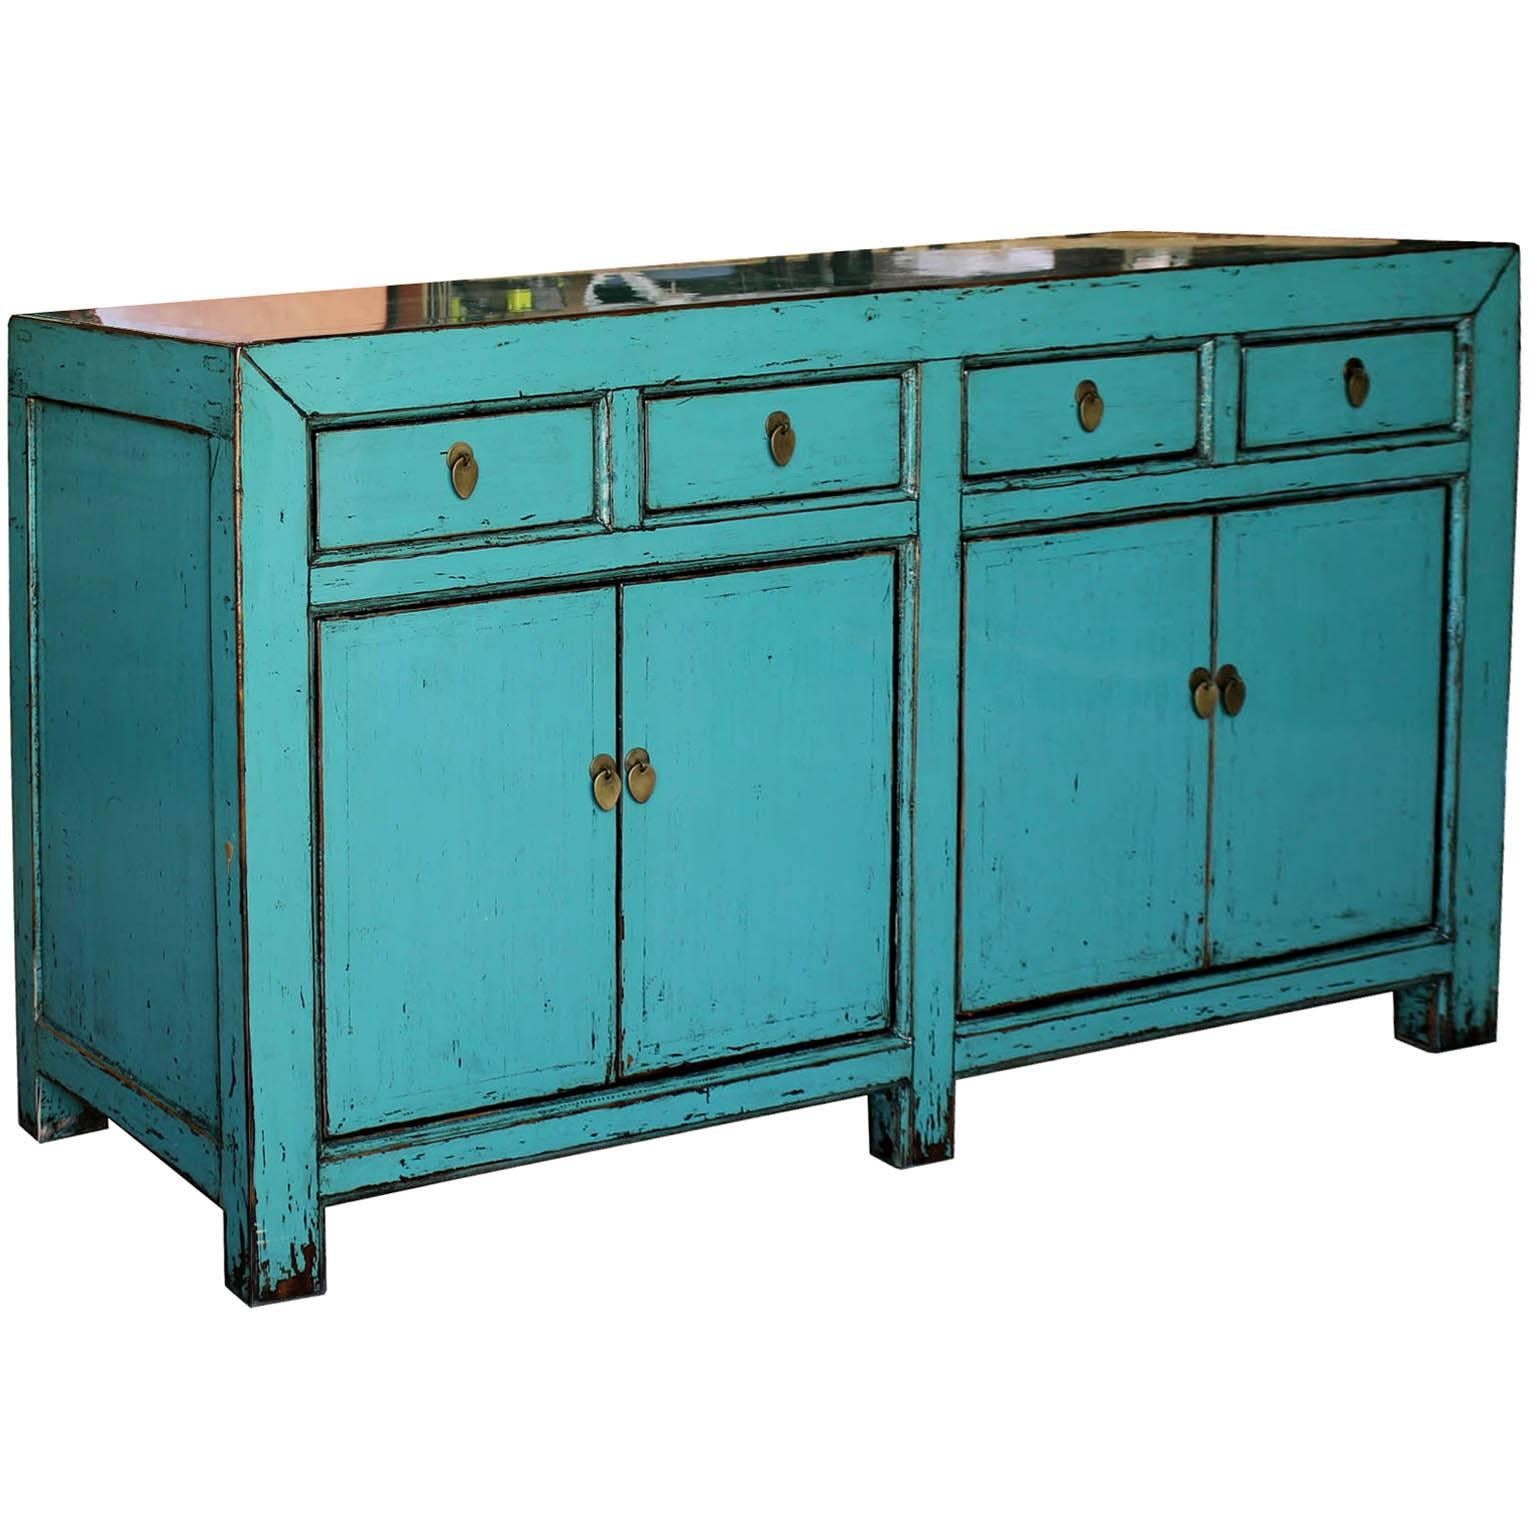 Light blue or turquoise lacquer sideboard with four drawers and elegant straight lines brings in a pop of color to any contemporary interior.